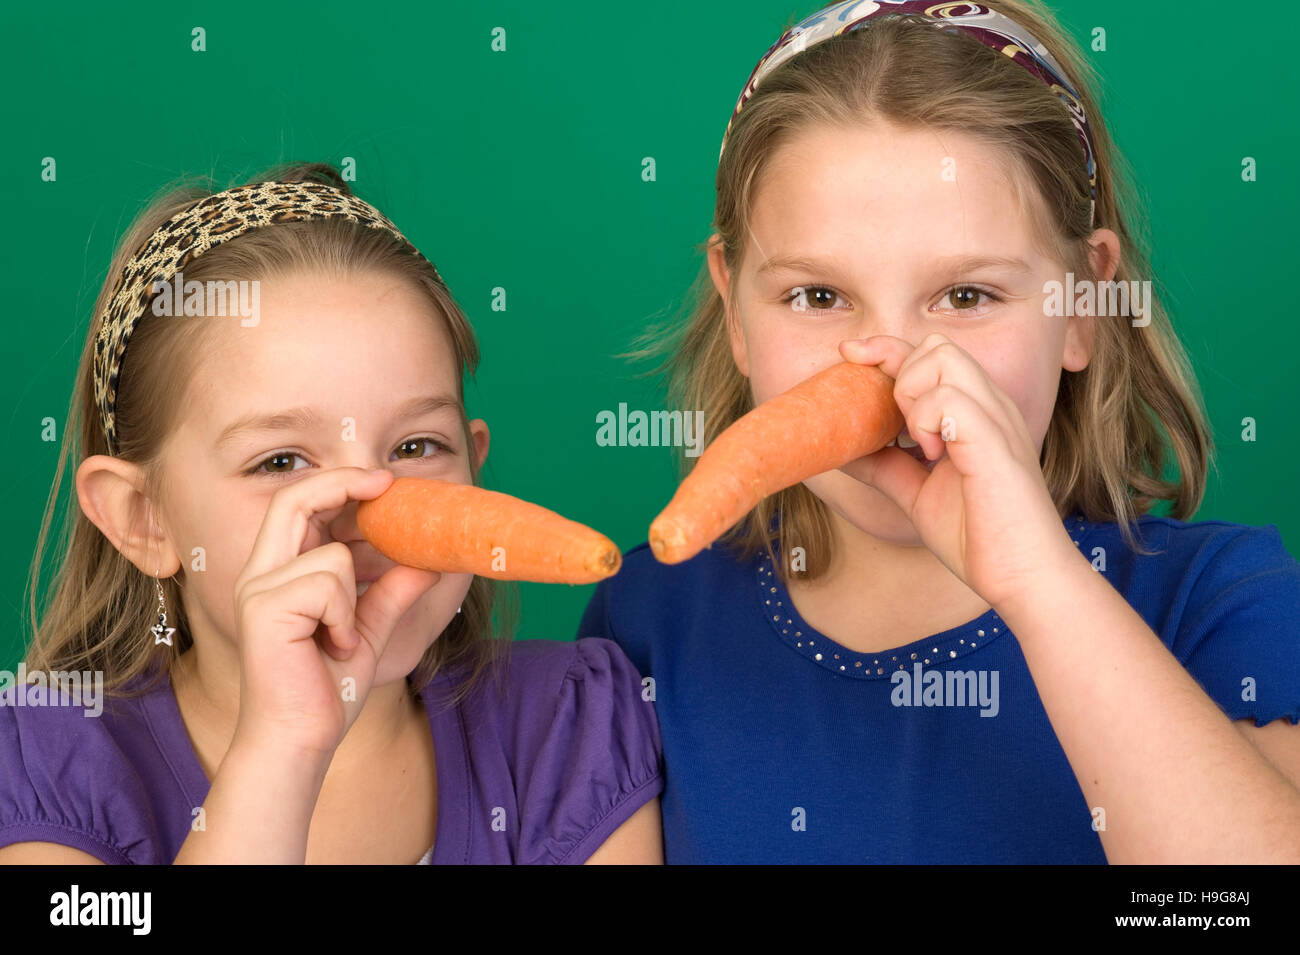 Girls holding carrots to their noses Stock Photo